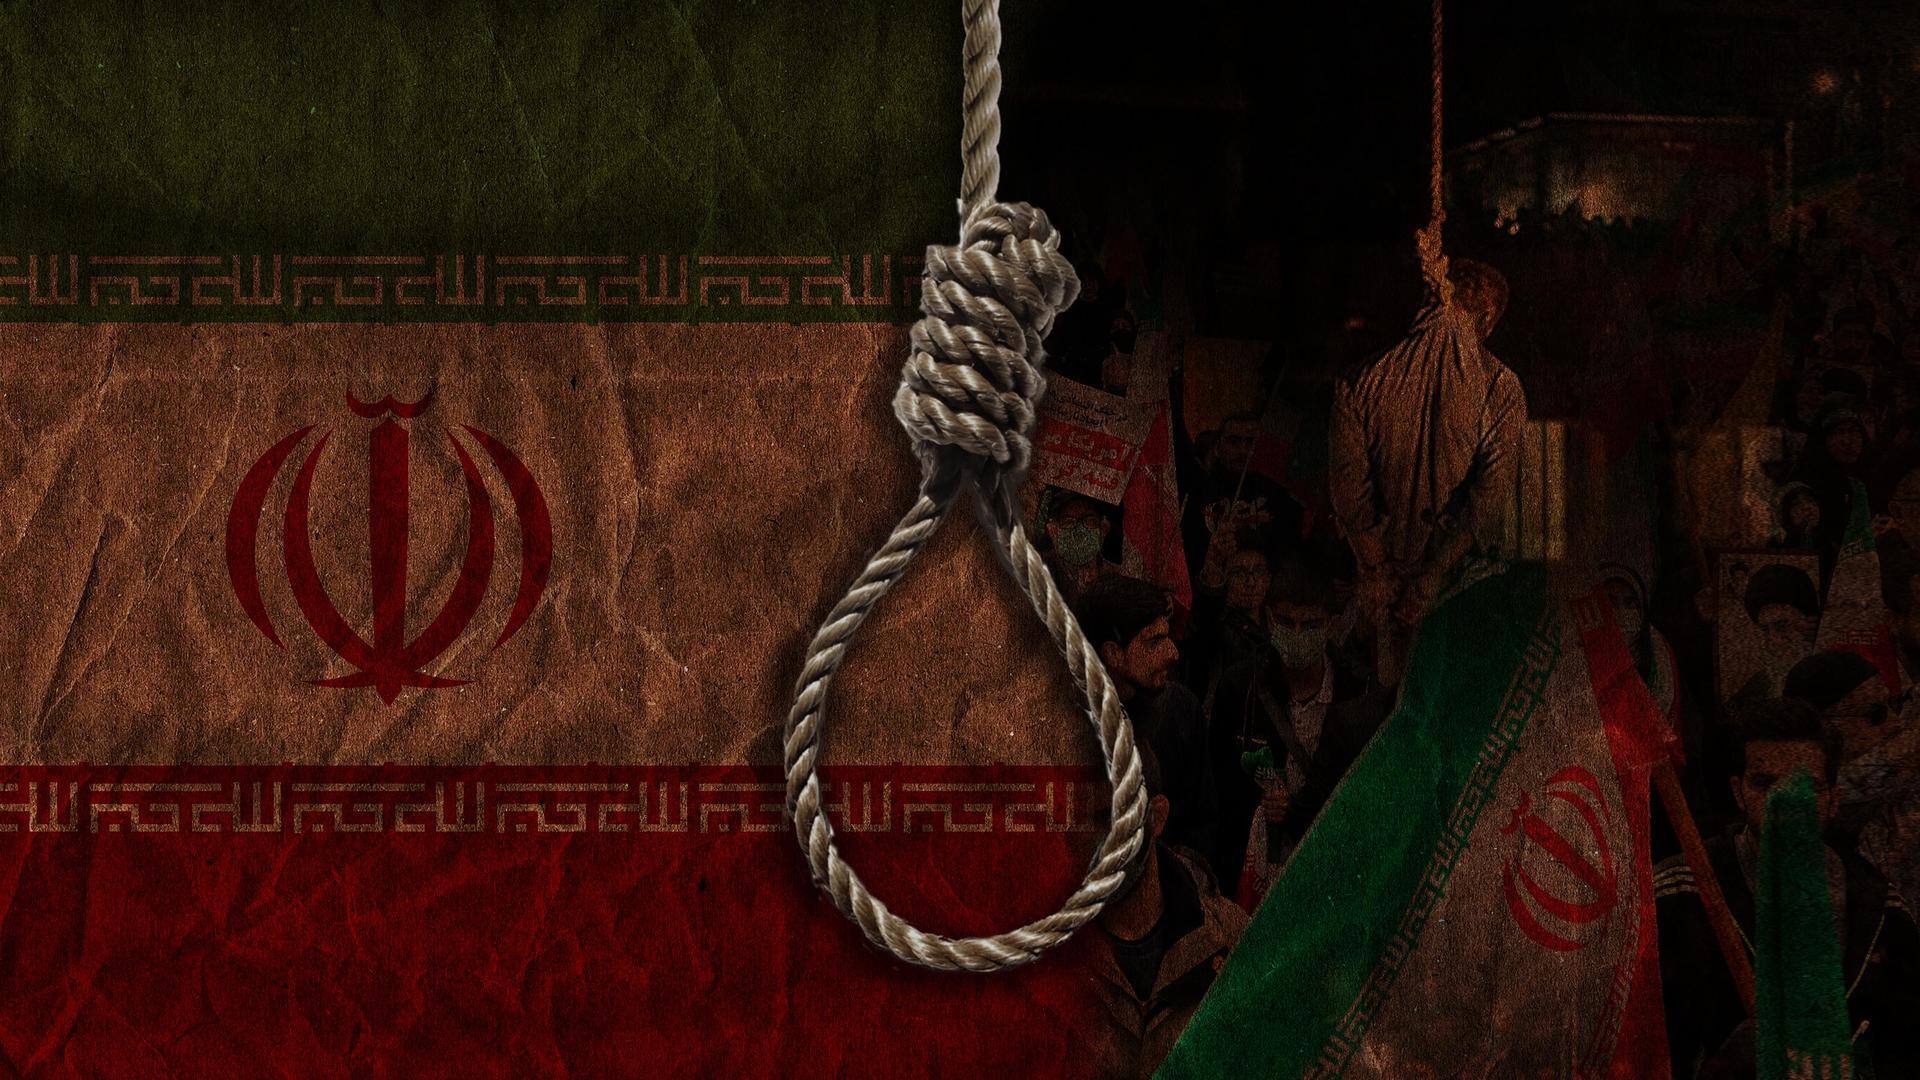 Anti-government protests: Iran executes second convict within a week